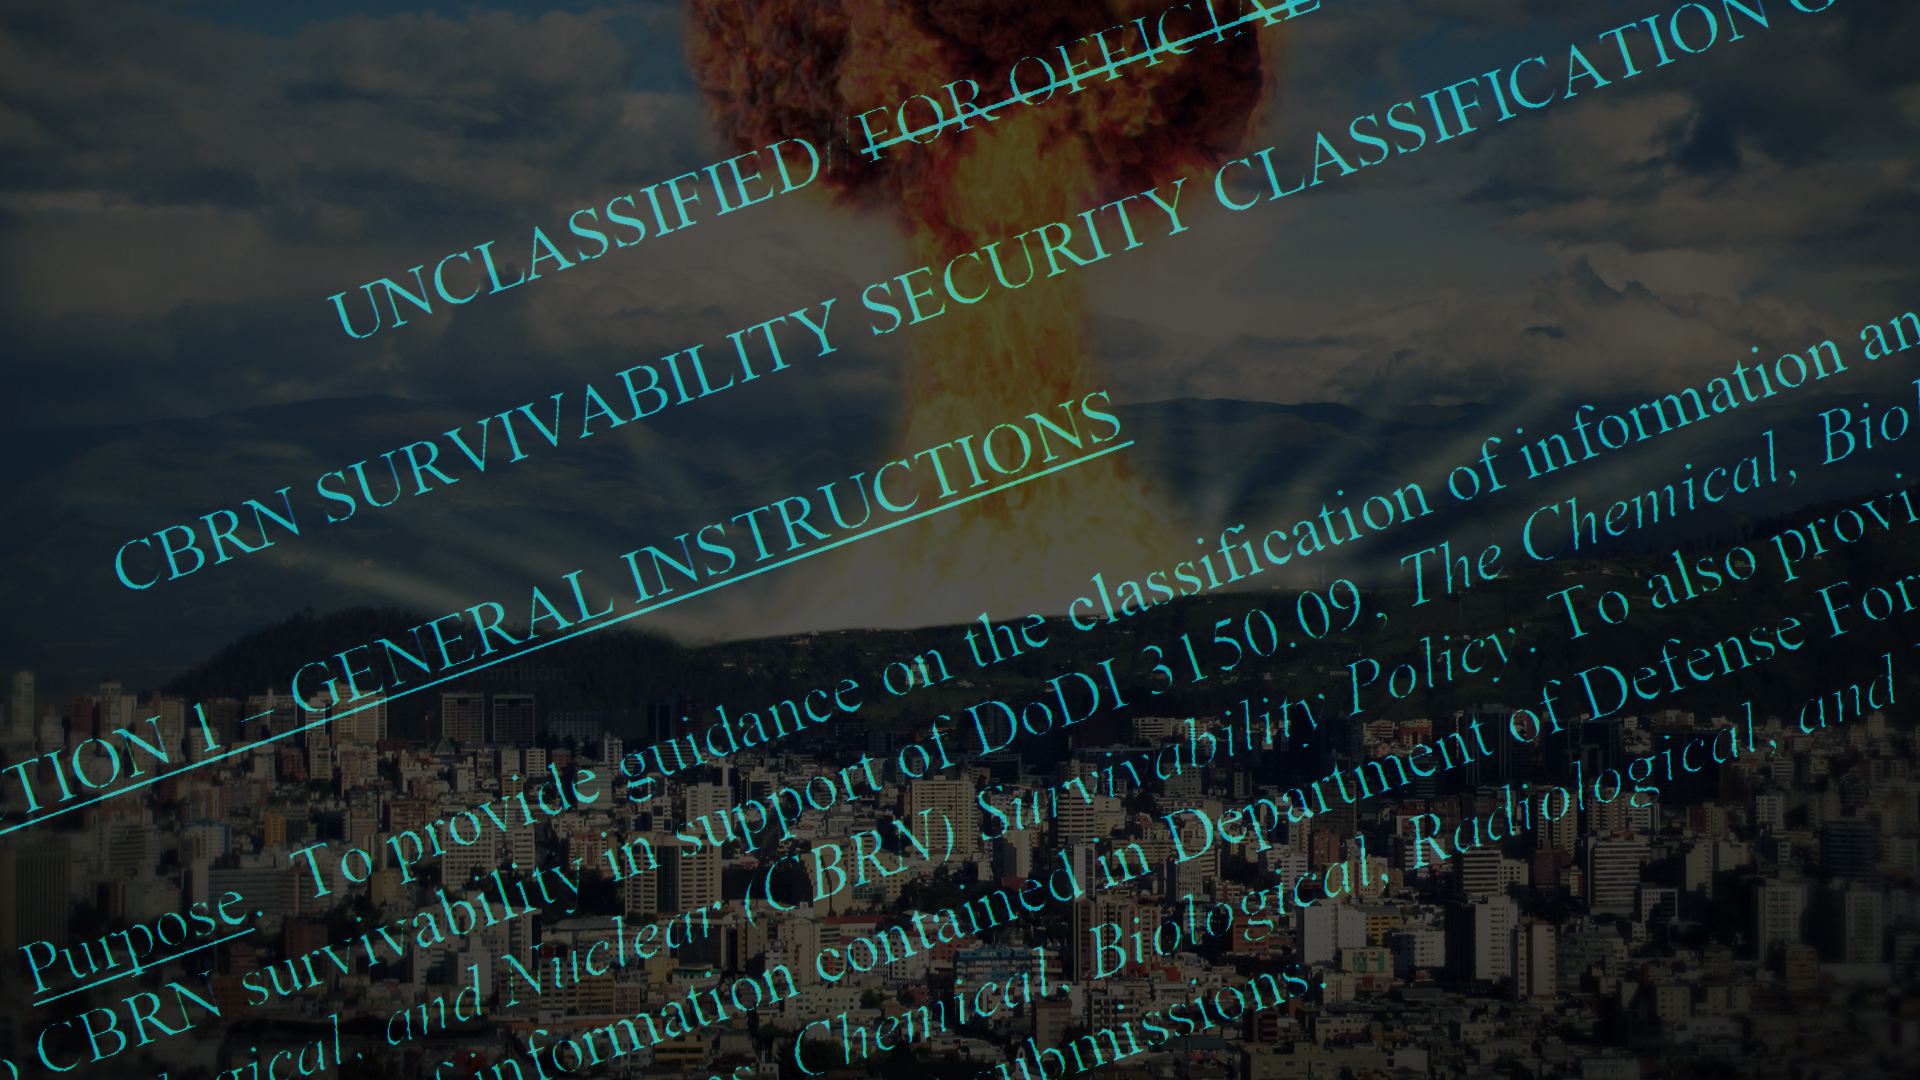 Chemical, Biological, Radiological, and Nuclear (CBRN) Survivability Security Classification Guide (SCG) – February 17, 2017